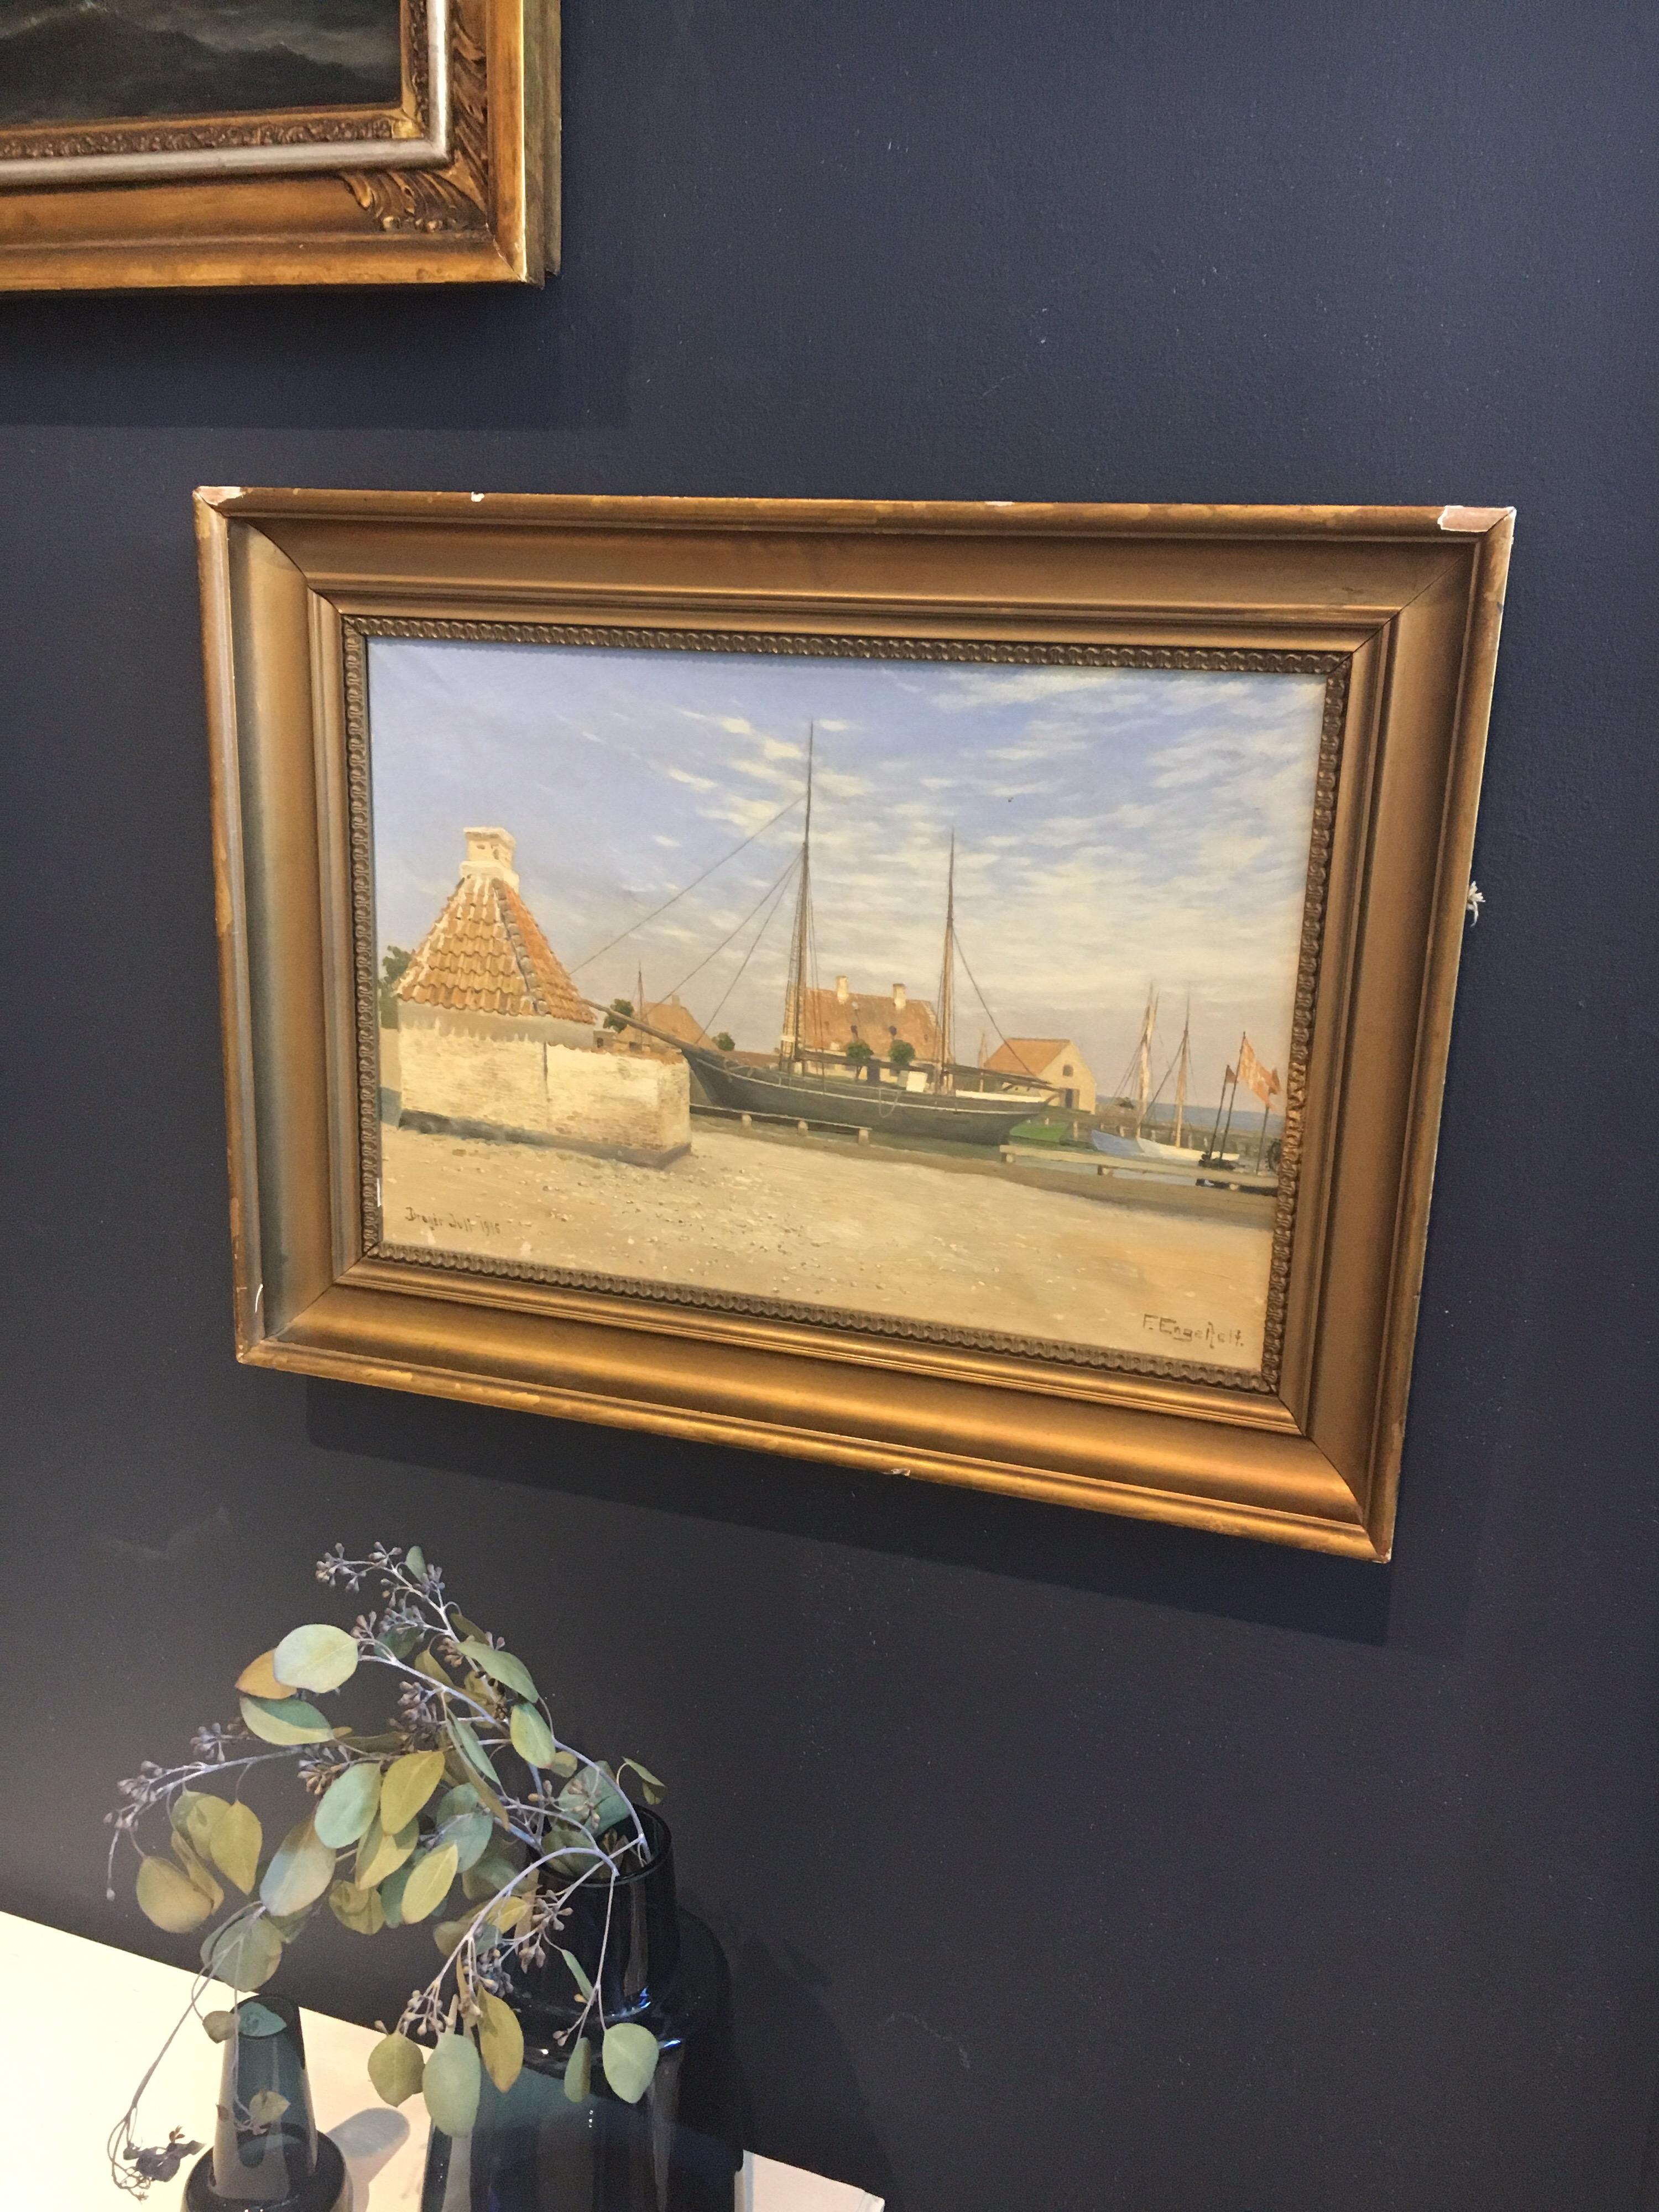 Charming Danish scene from Dragoer, with ships in harbor. Painted by Frederik Engelfelt in 1916. Oil on canvas, signed F. Engelfelt 1916.

Listed dimensions without frame.